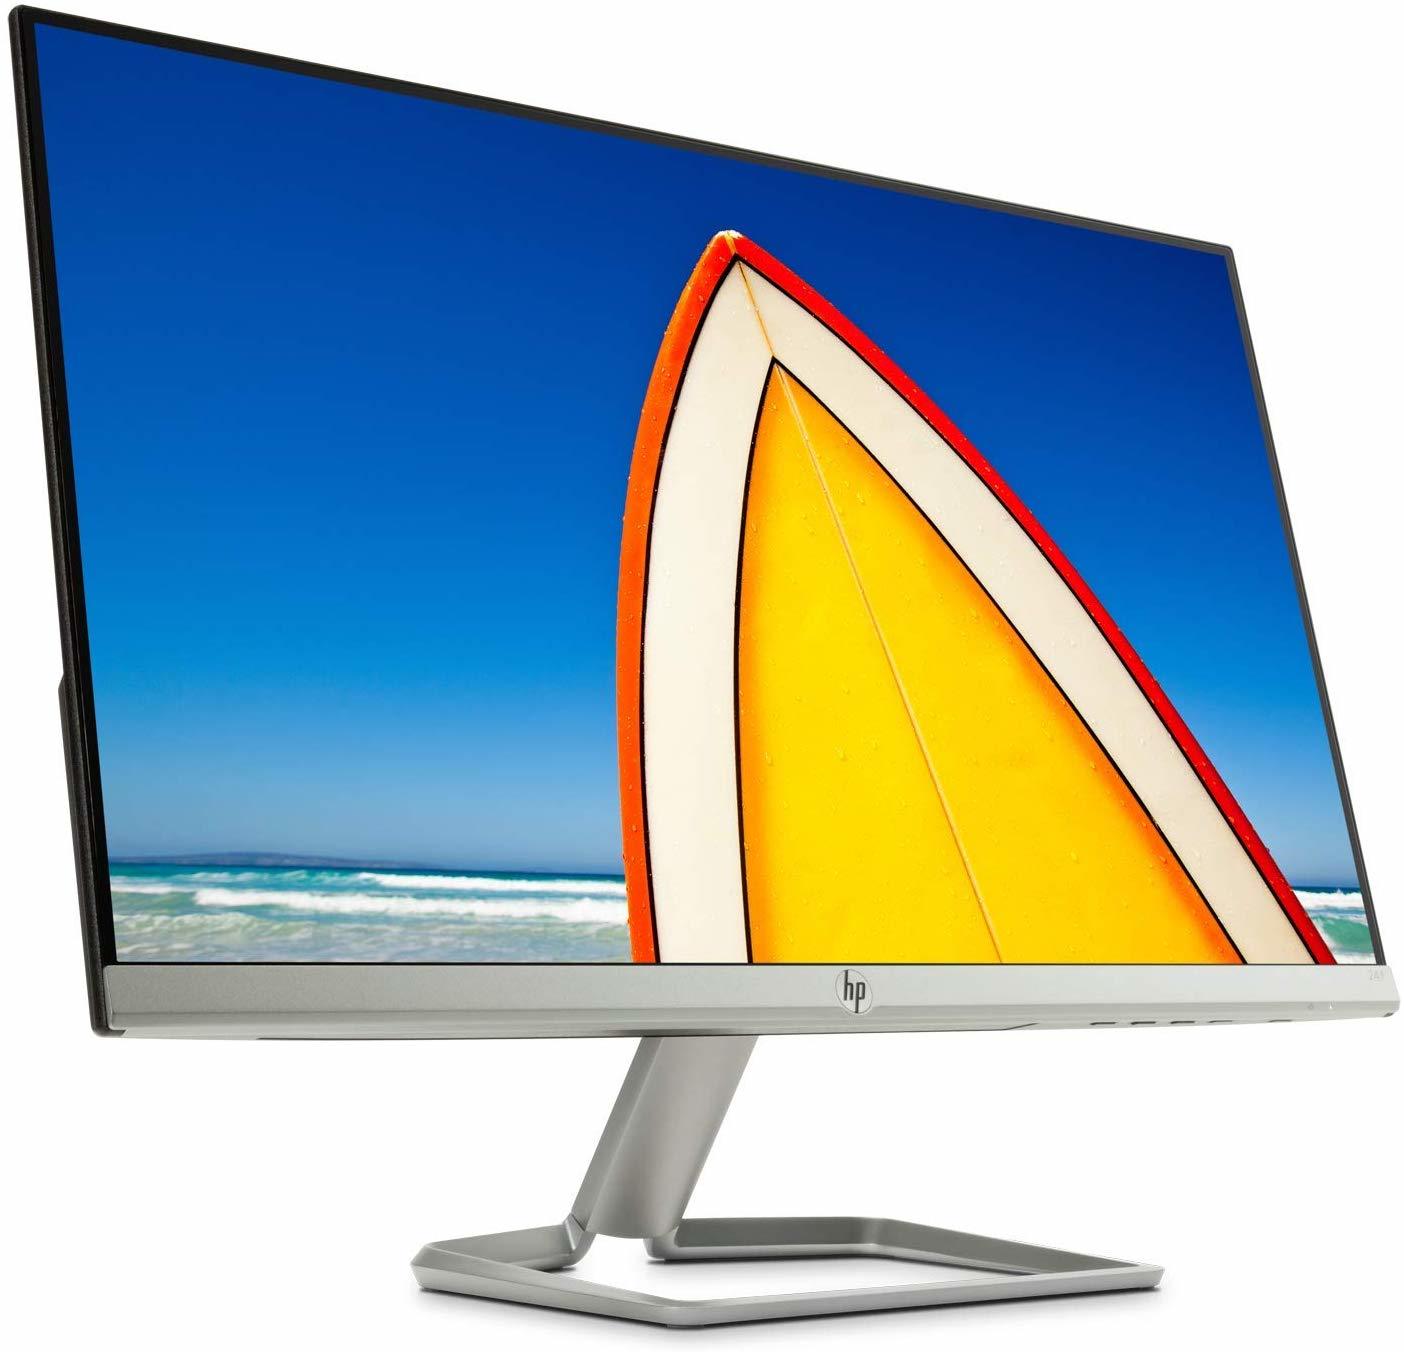 Recyclen accu Menagerry Buy HP - 24F 24" Full HD IPS Monitor HDMI, VGA, AMD FreeSync, 1920 x 1080  pixels at 60Hz, 5ms response time (Black/Silver) Online - Shop Electronics  & Appliances on Carrefour UAE